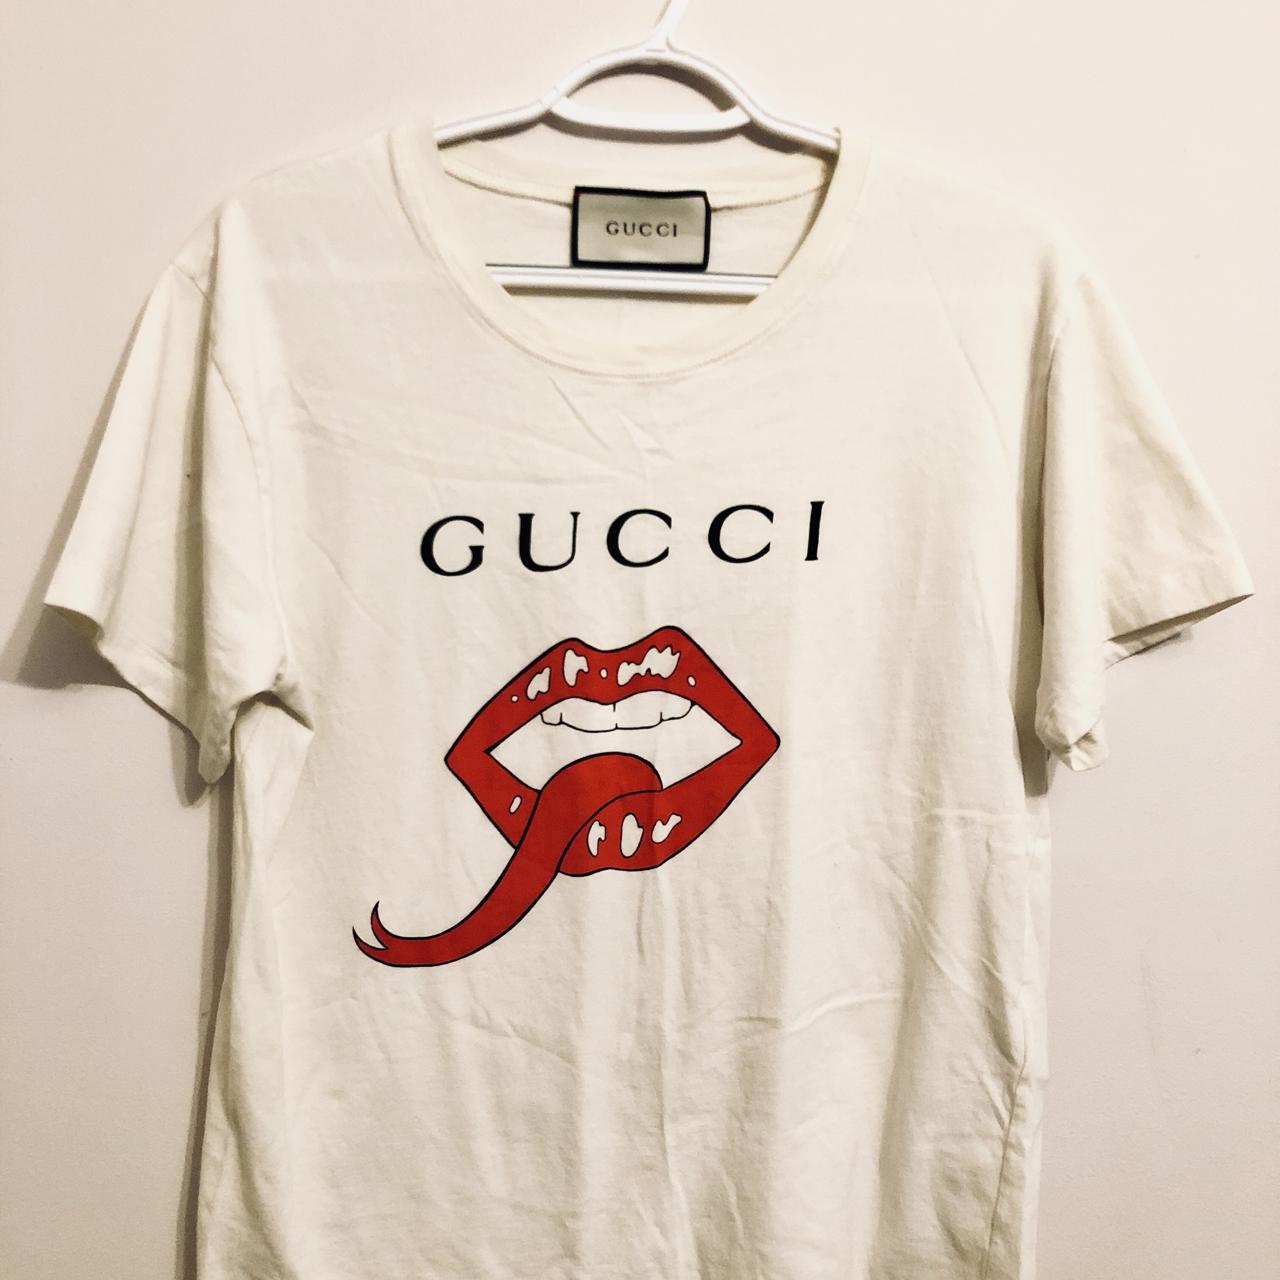 Aside from an obvious love for the classic GUCCI... -